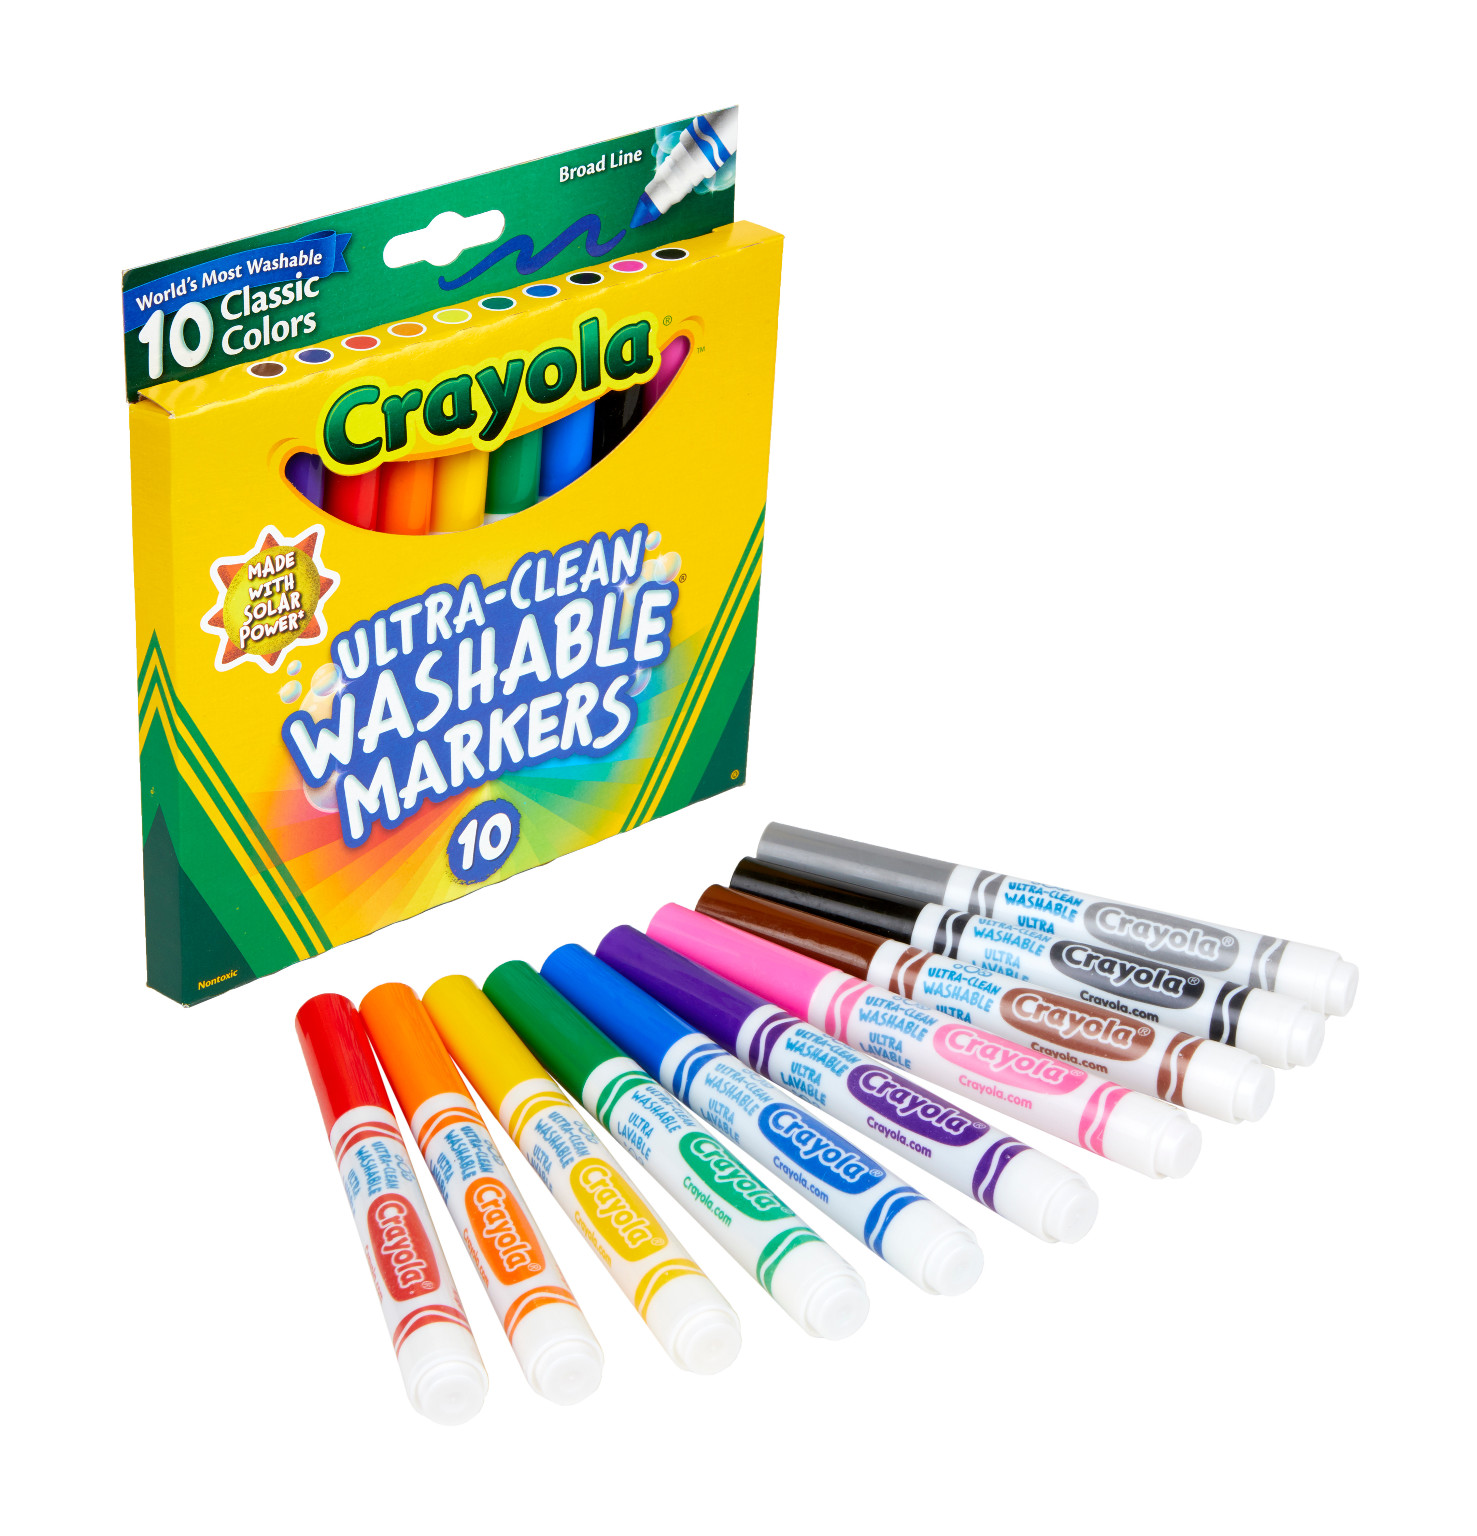 Crayola 200 Count Washable Broad Line Markers Classpack 10 Colors